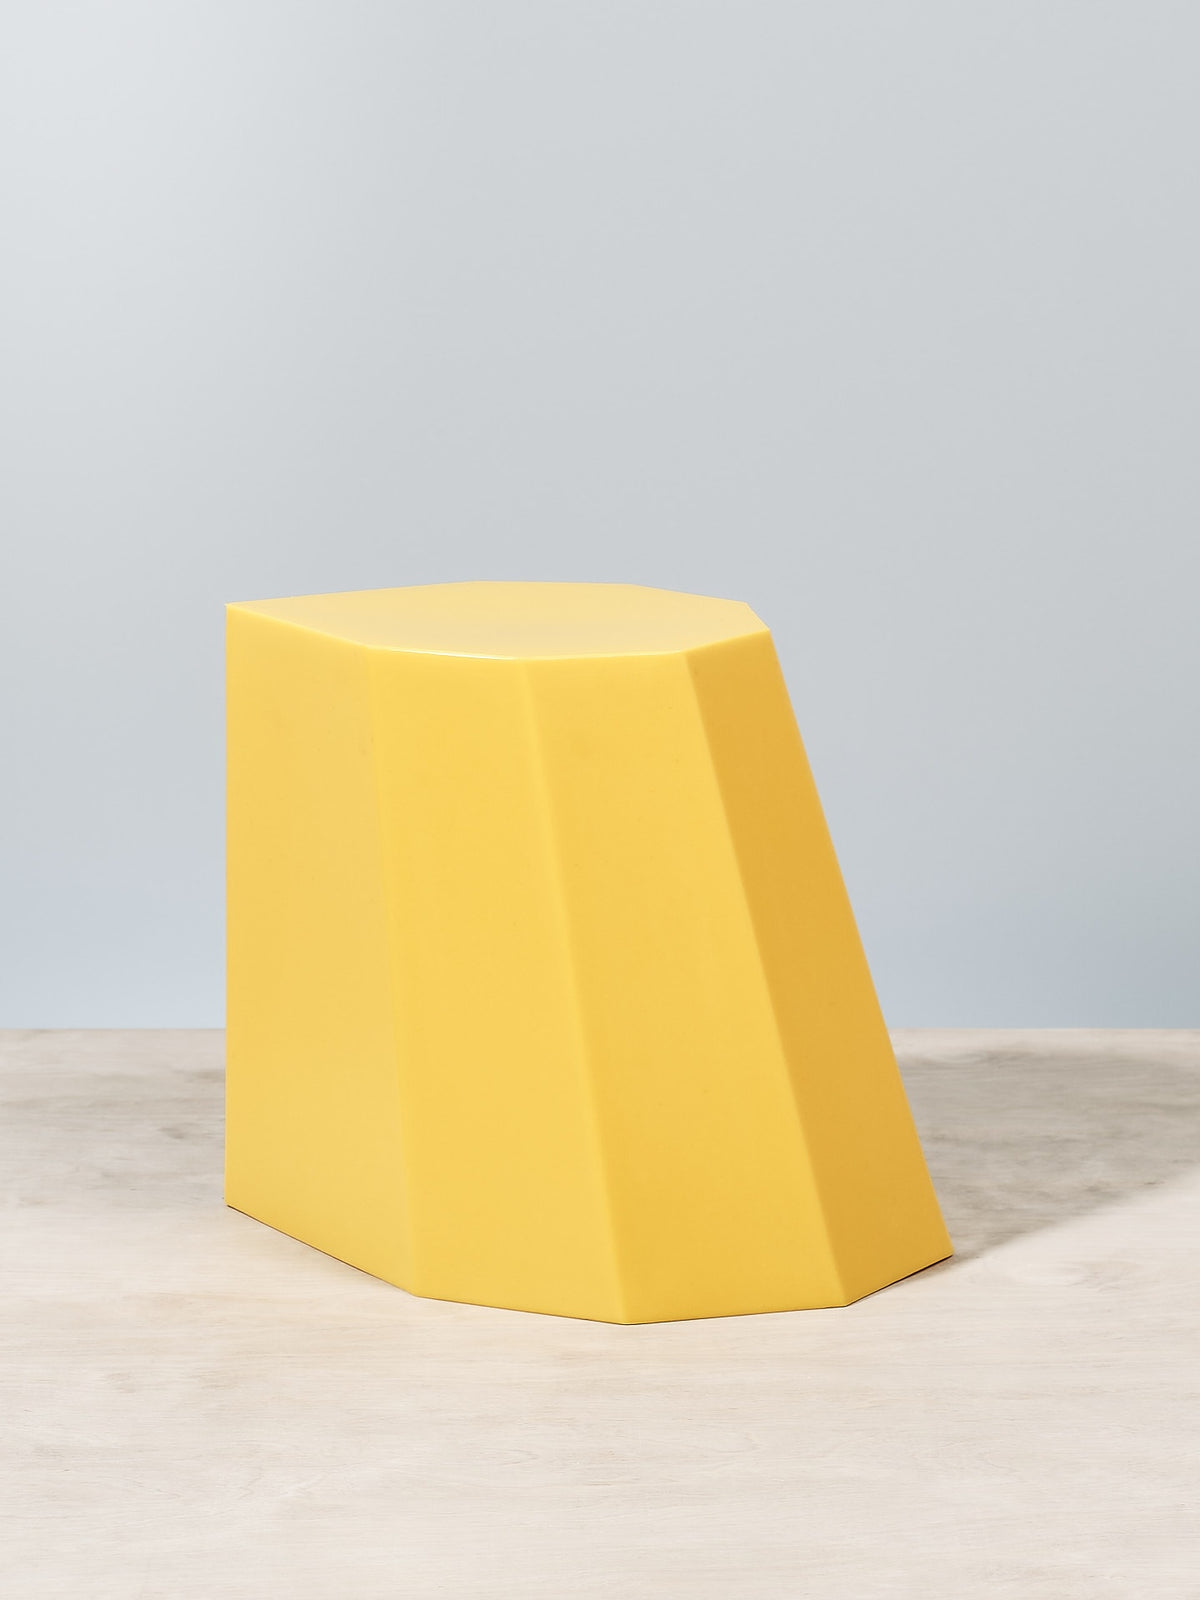 An Arnoldino Stool – Yellow sitting on top of a wooden table by Martino Gamper.